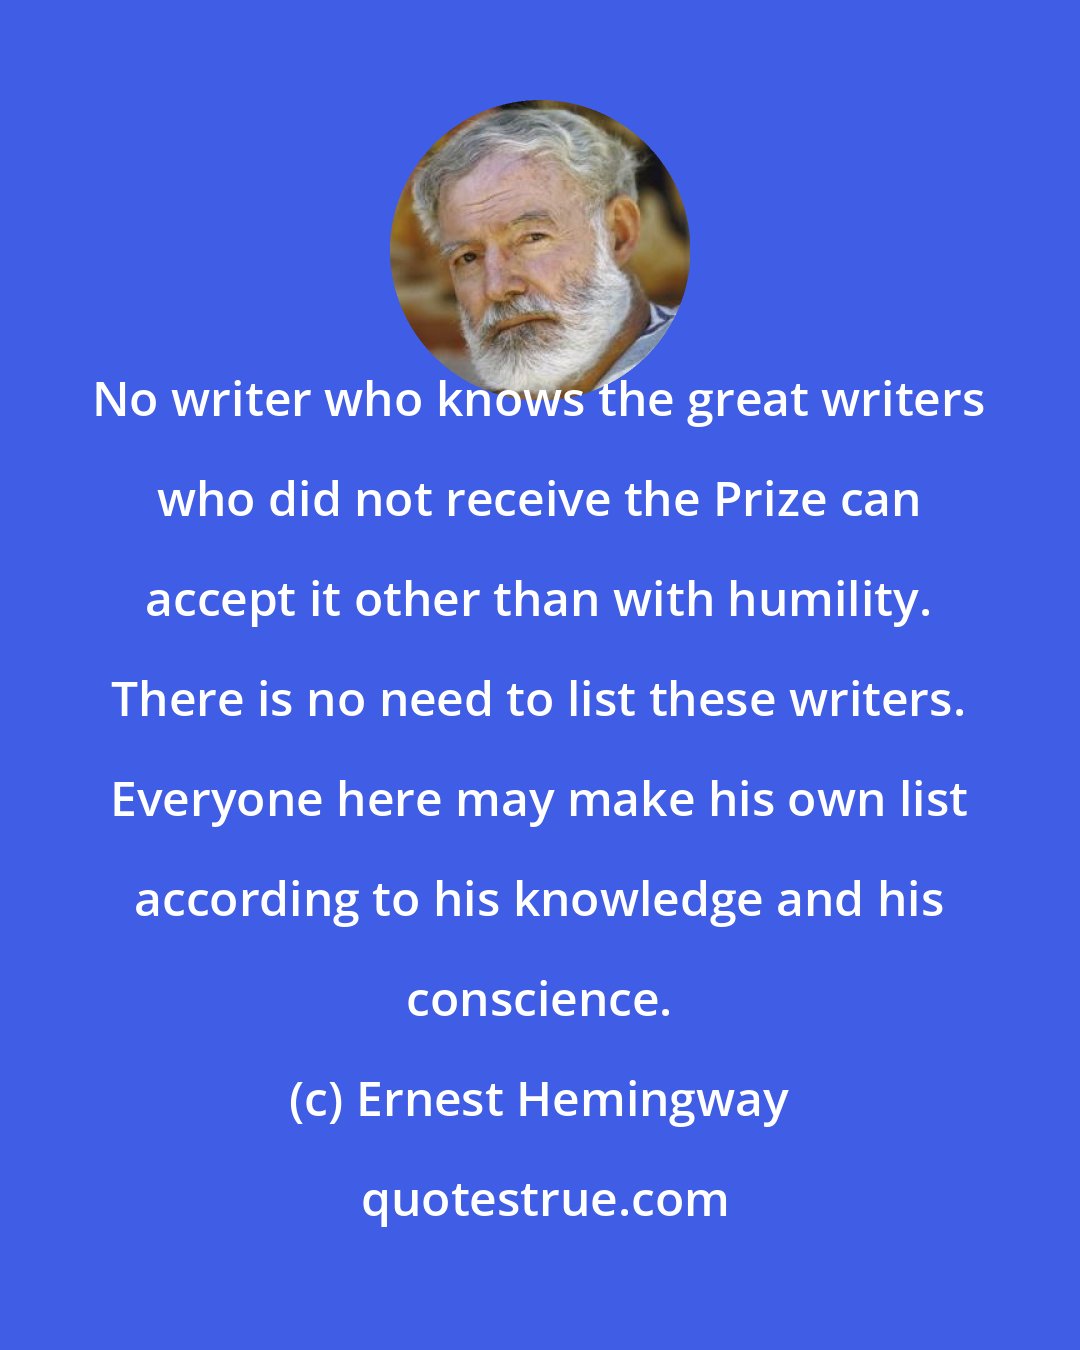 Ernest Hemingway: No writer who knows the great writers who did not receive the Prize can accept it other than with humility. There is no need to list these writers. Everyone here may make his own list according to his knowledge and his conscience.